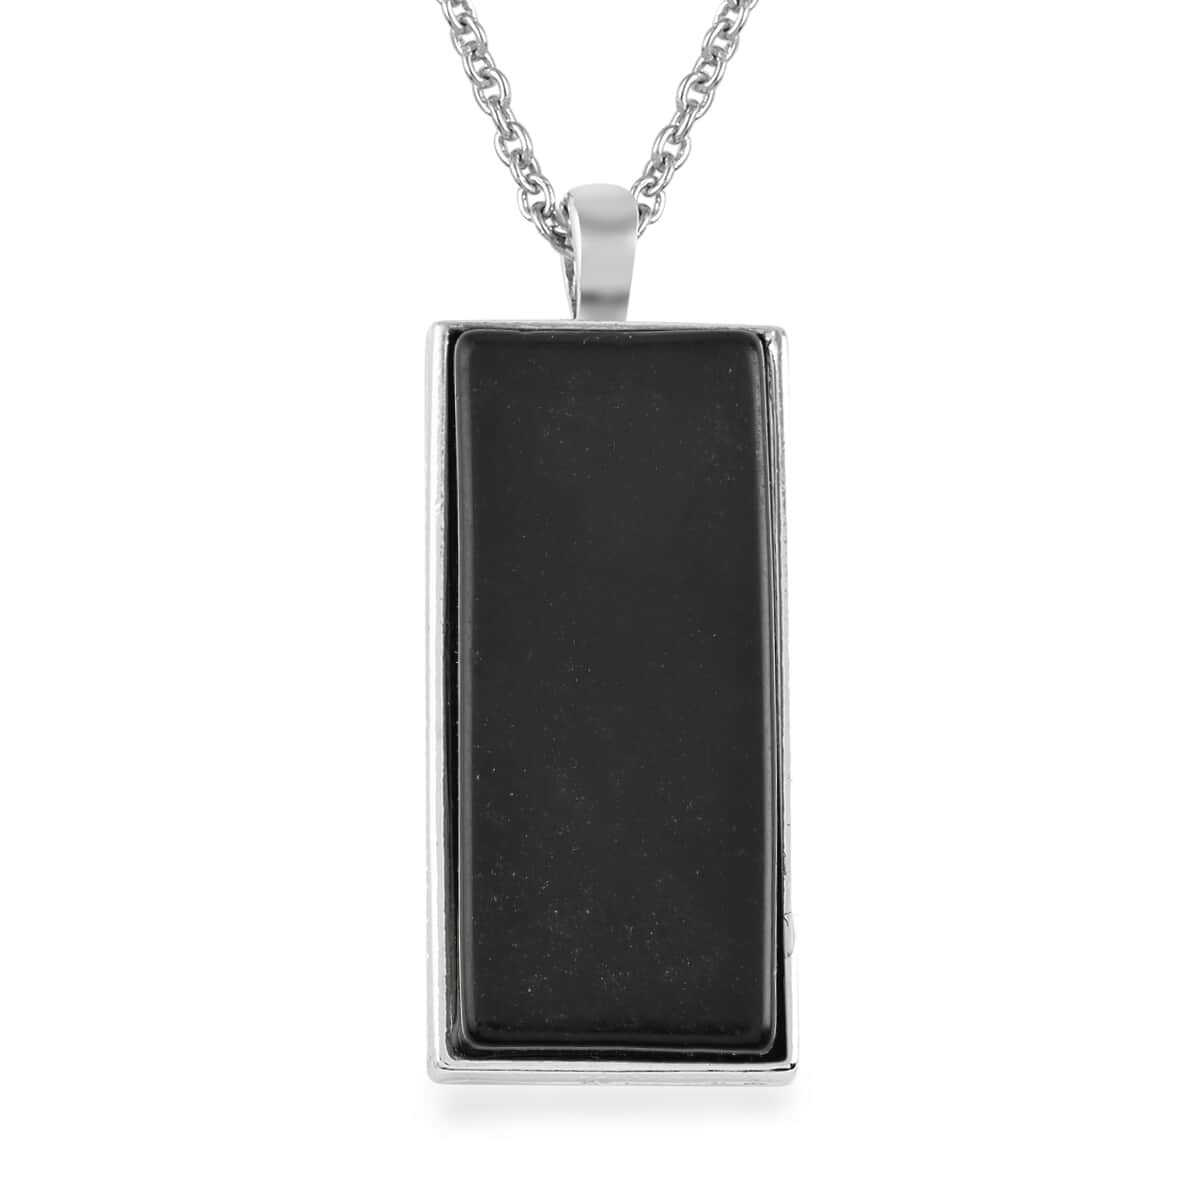 Buy Black Agate Dogtag Pendant Necklace 24 Inches in Silvertone